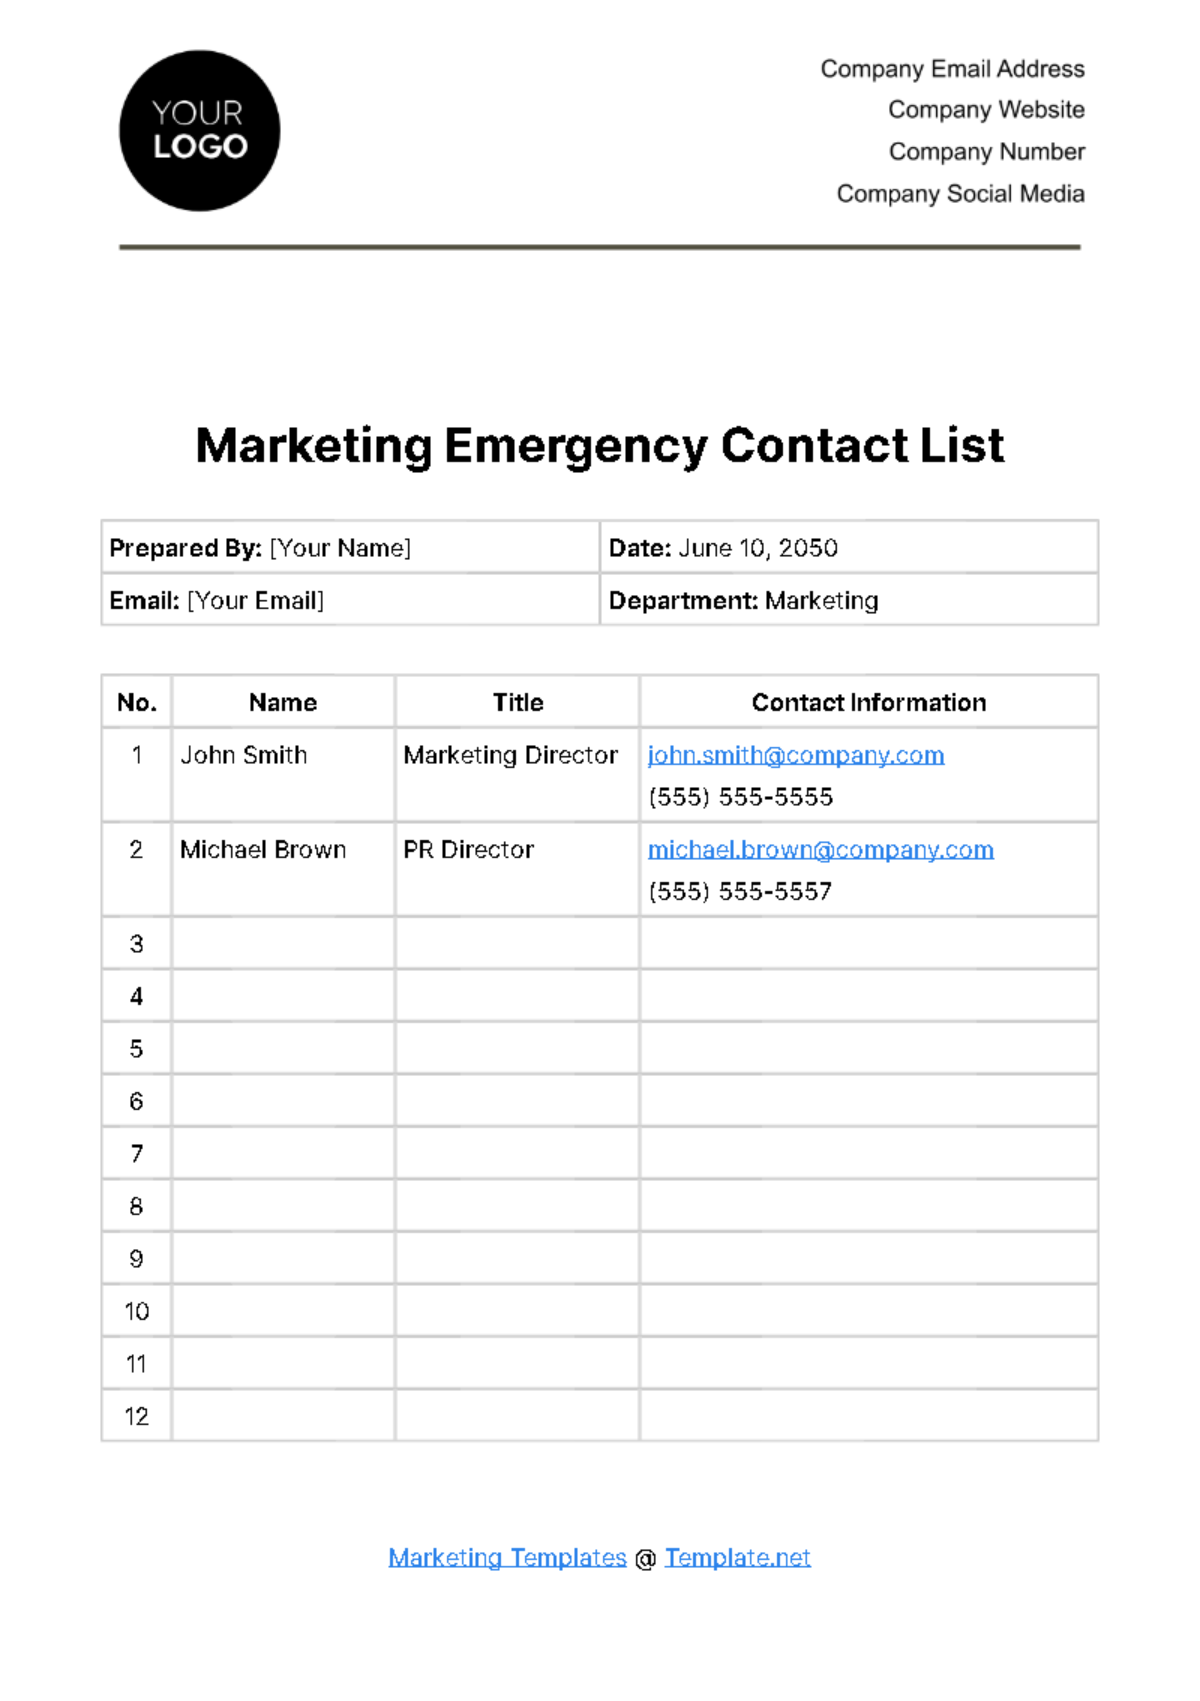 Marketing Emergency Contact List Template Edit Online Download